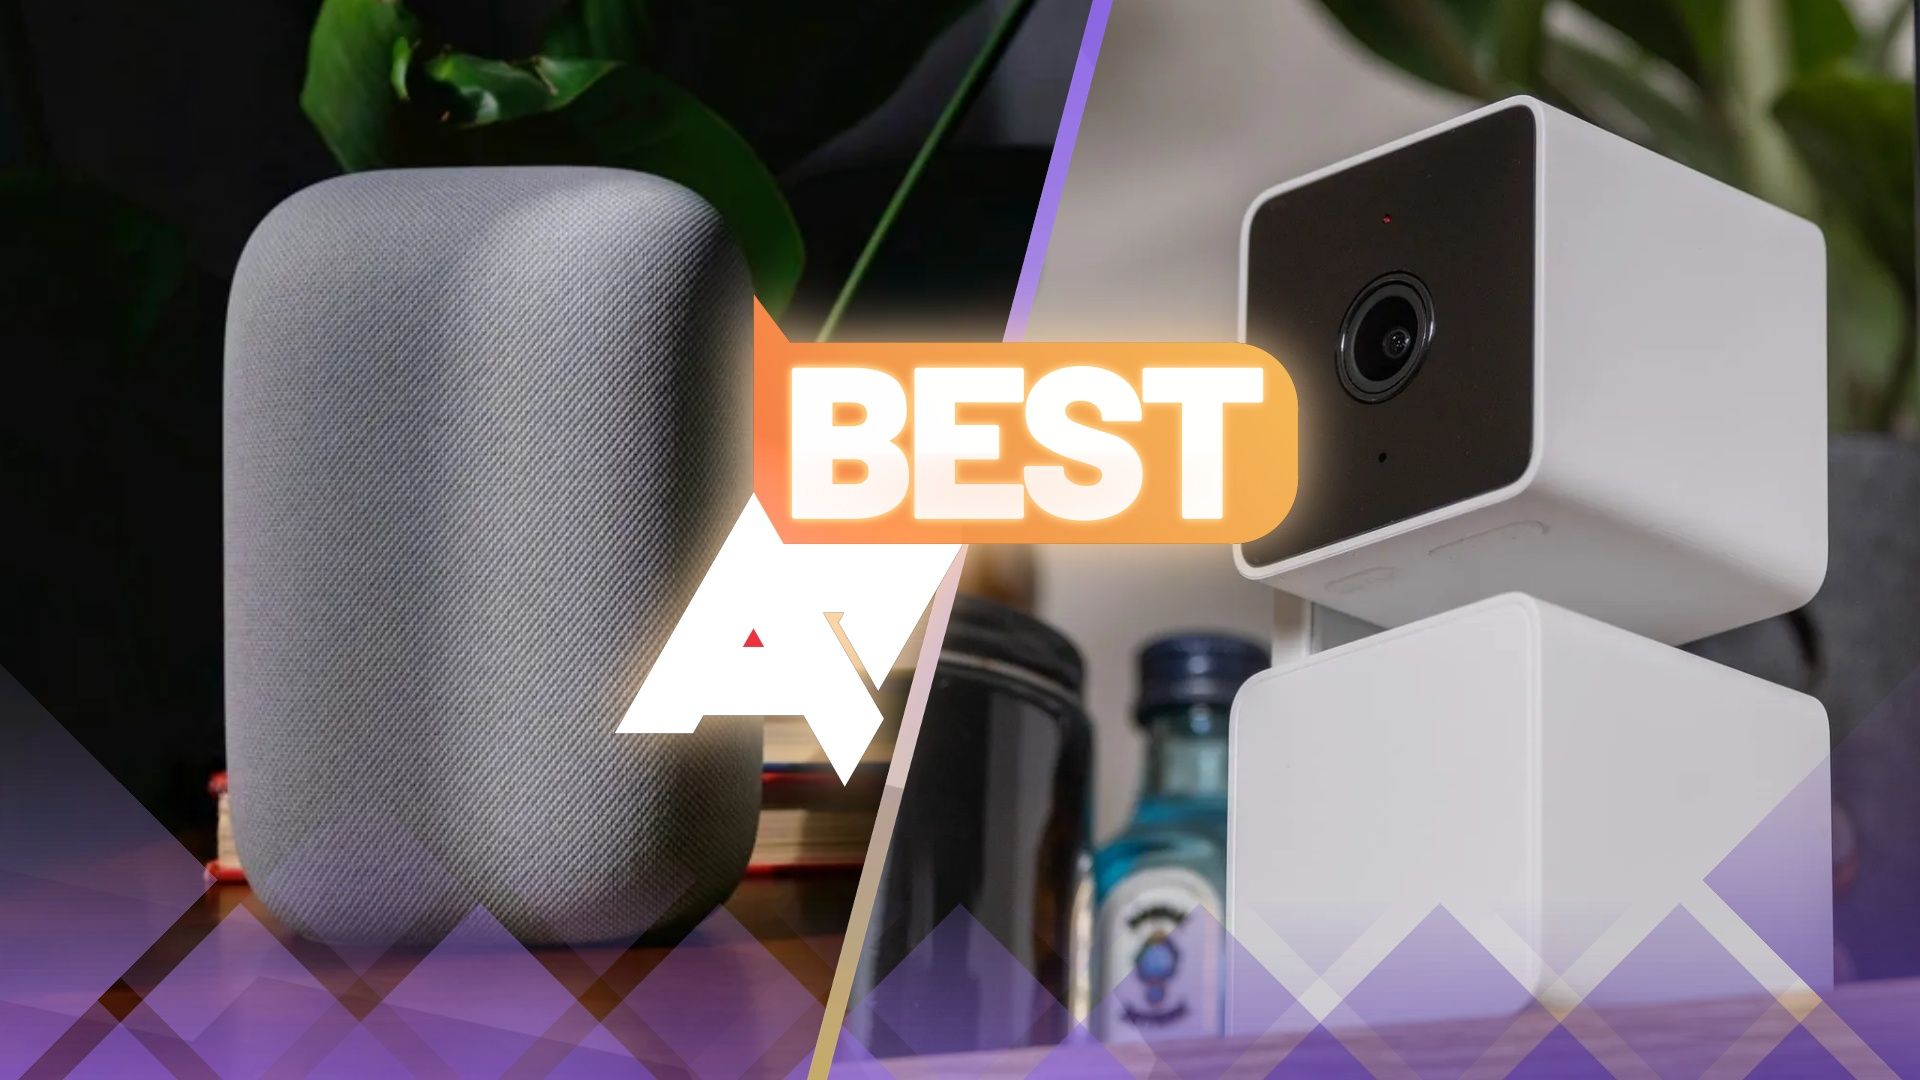 A Google Nest Audio and a security camera with an 'AP Best' logo in between them